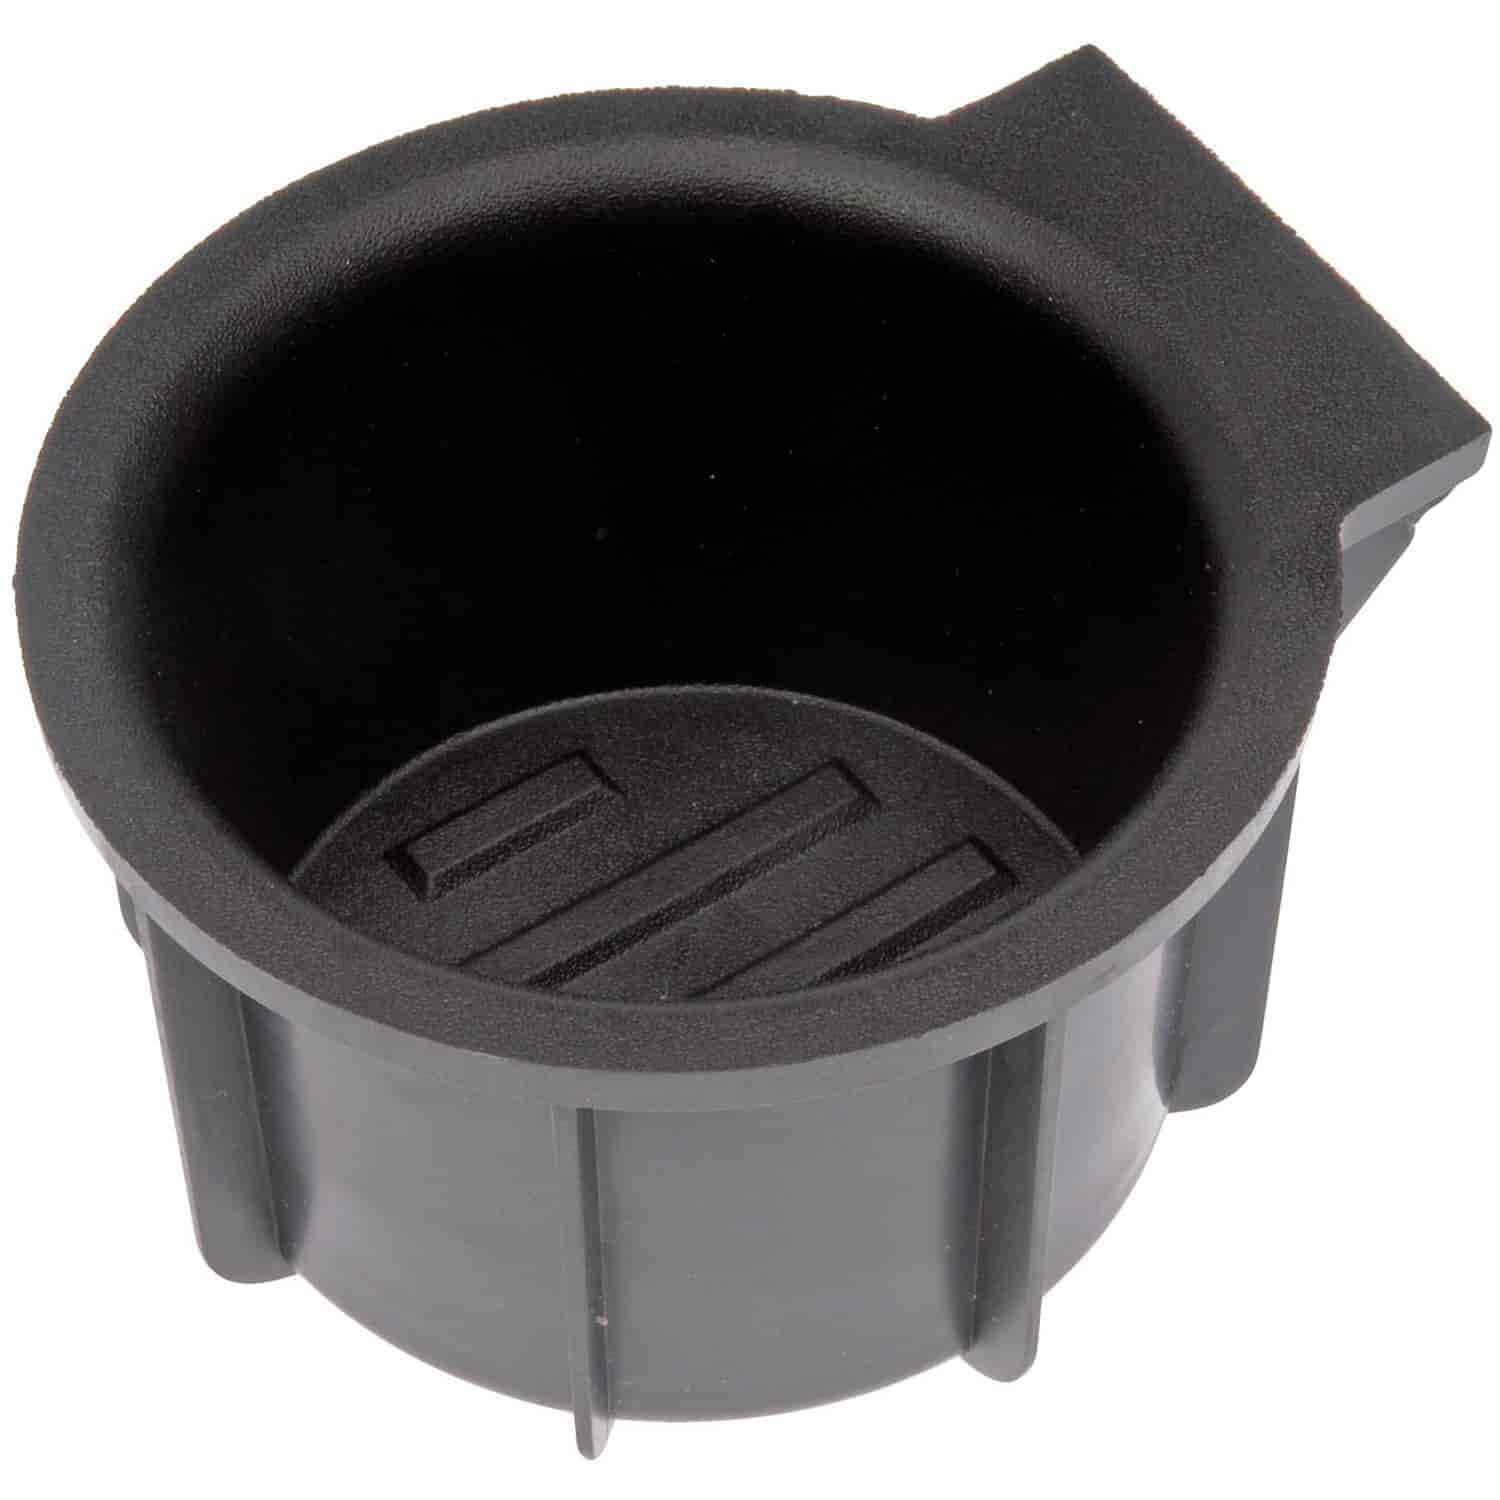 Cup Holder Insert 2009-2014 Ford F150 / 2010-2014 Lincoln Mark LT